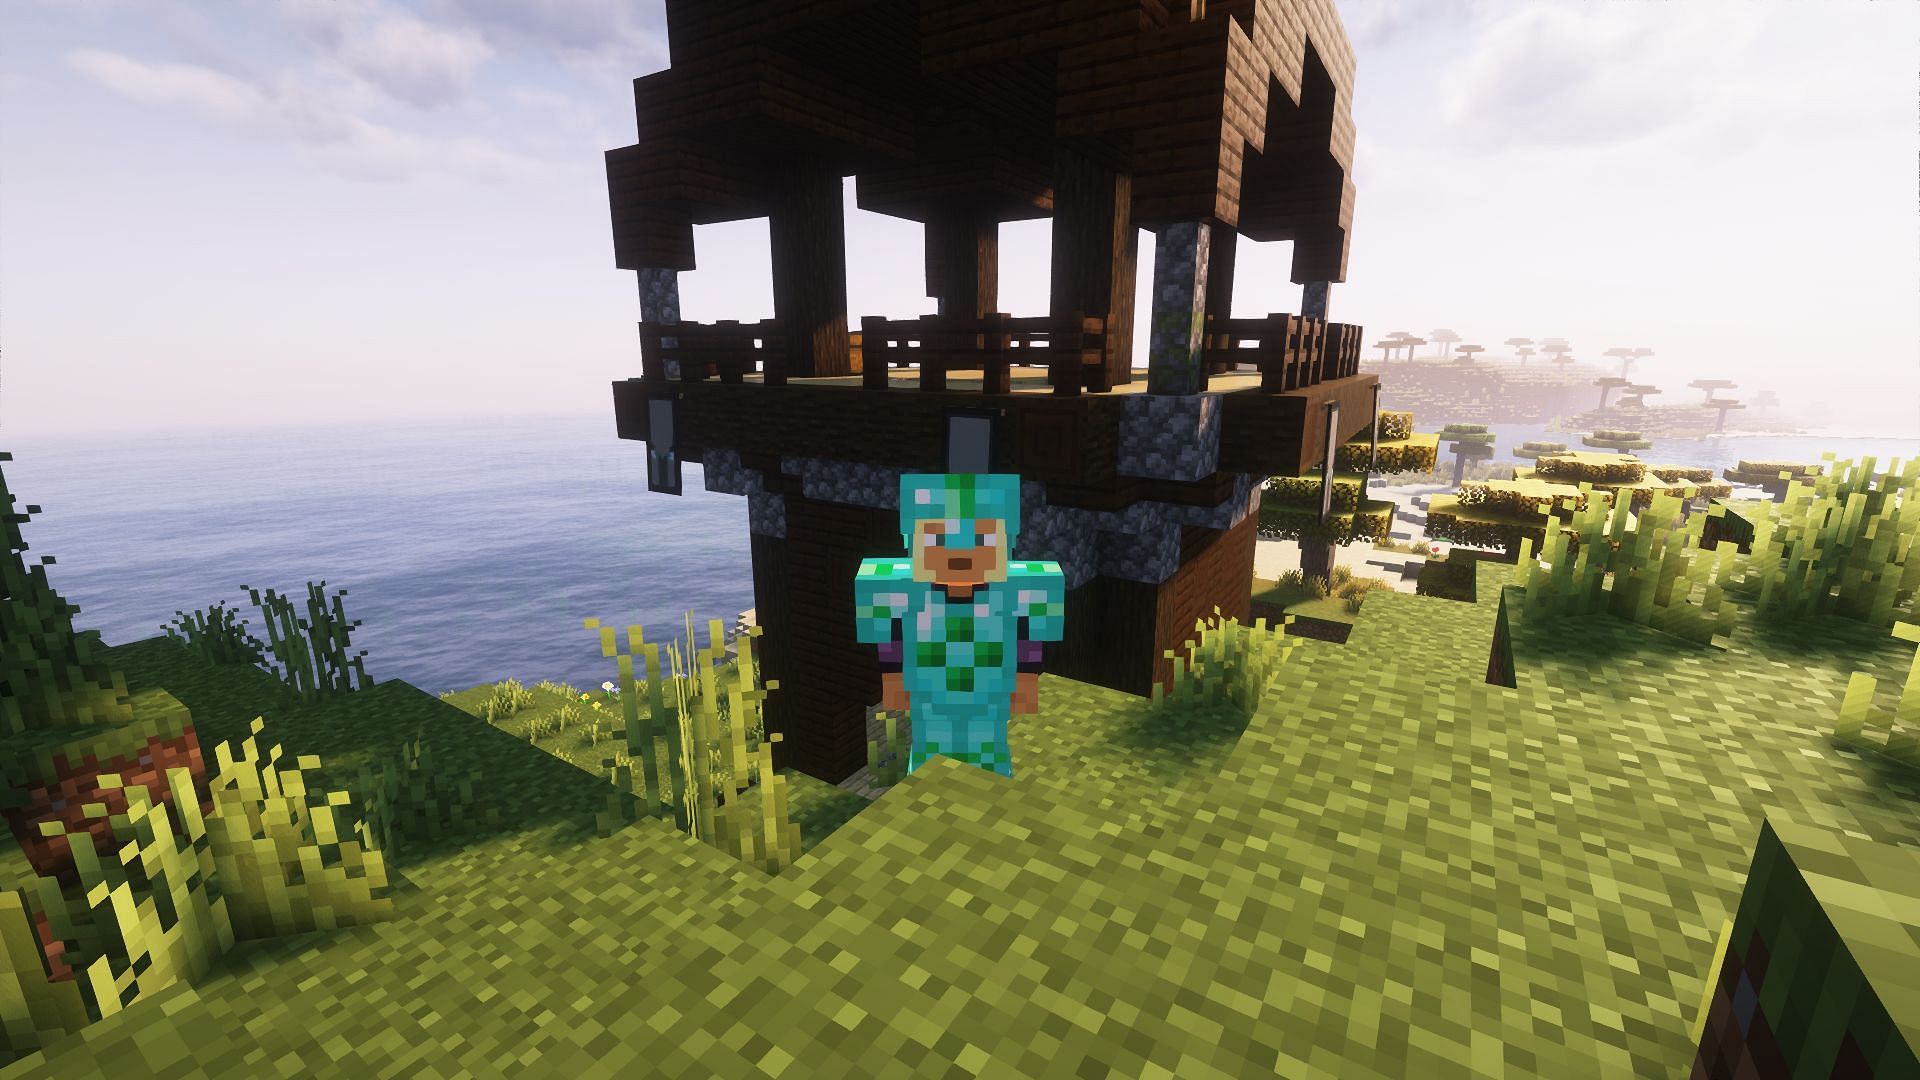 Sentry Armor Trim can be found in Pillager Outpost in Minecraft (Image via Mojang)